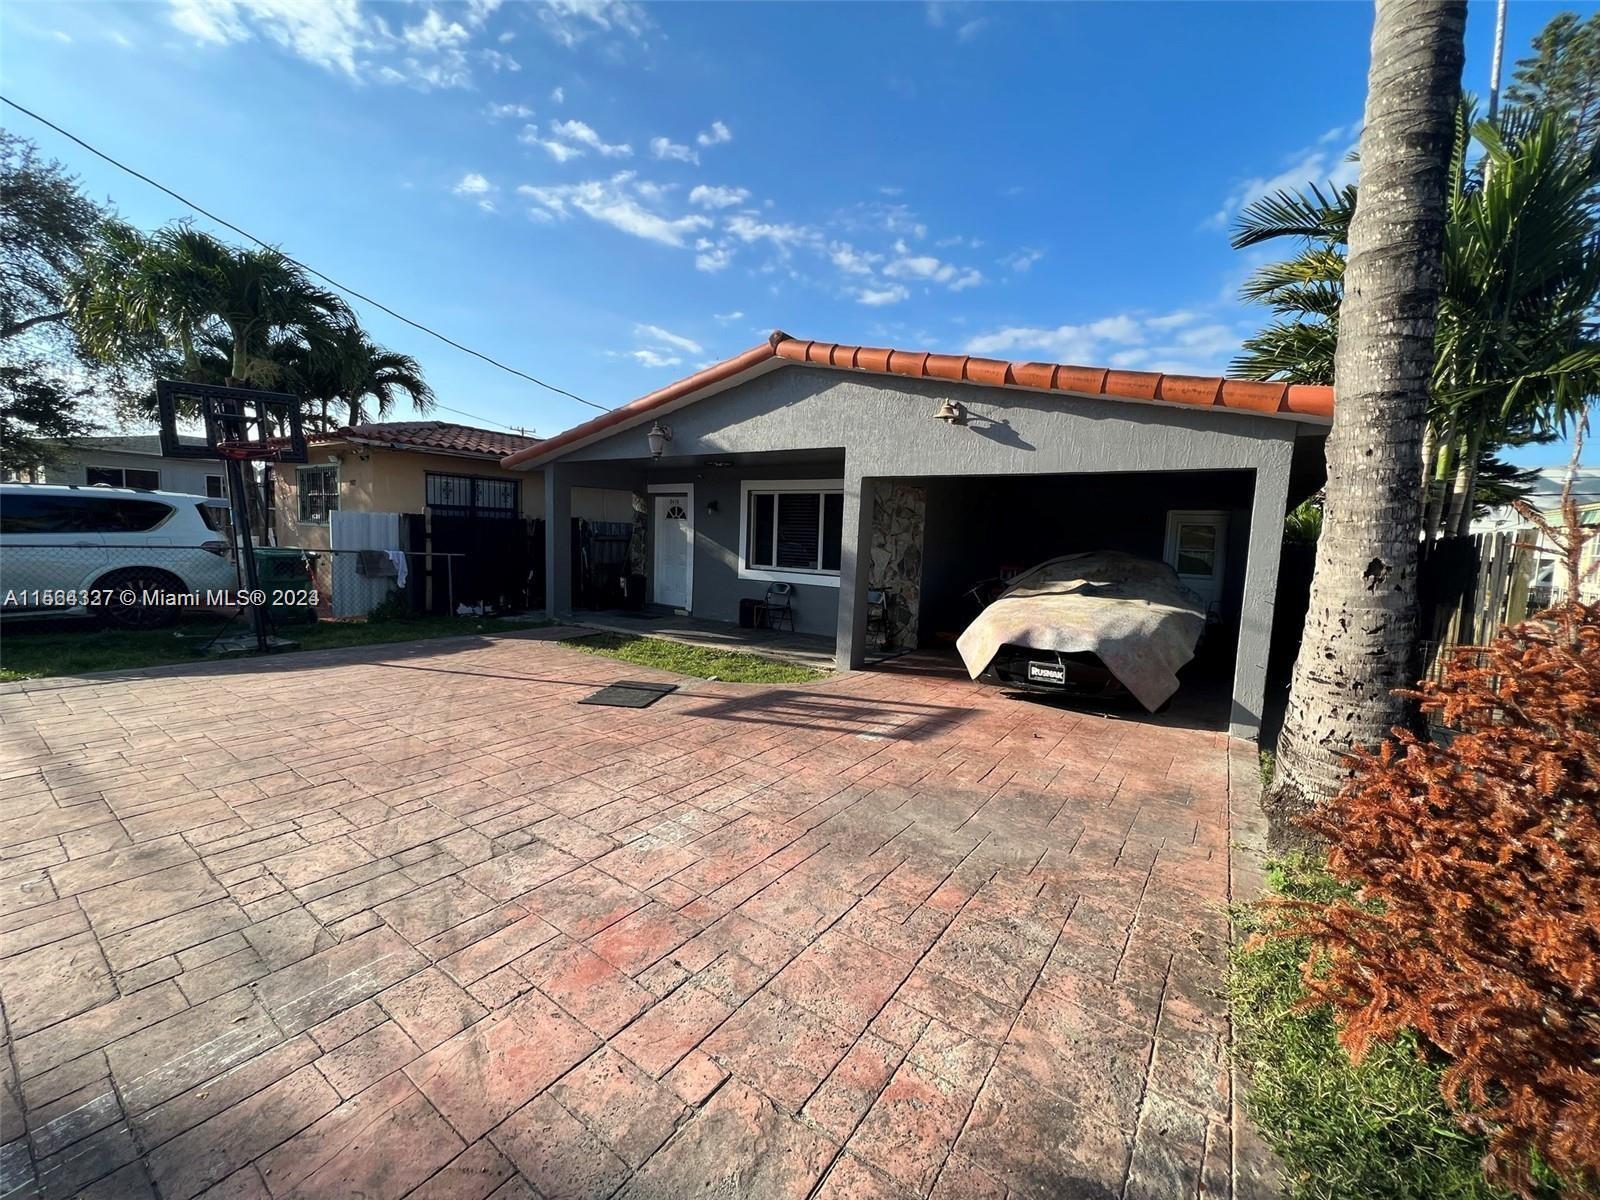 Photo of 2475 NW 35th St in Miami, FL